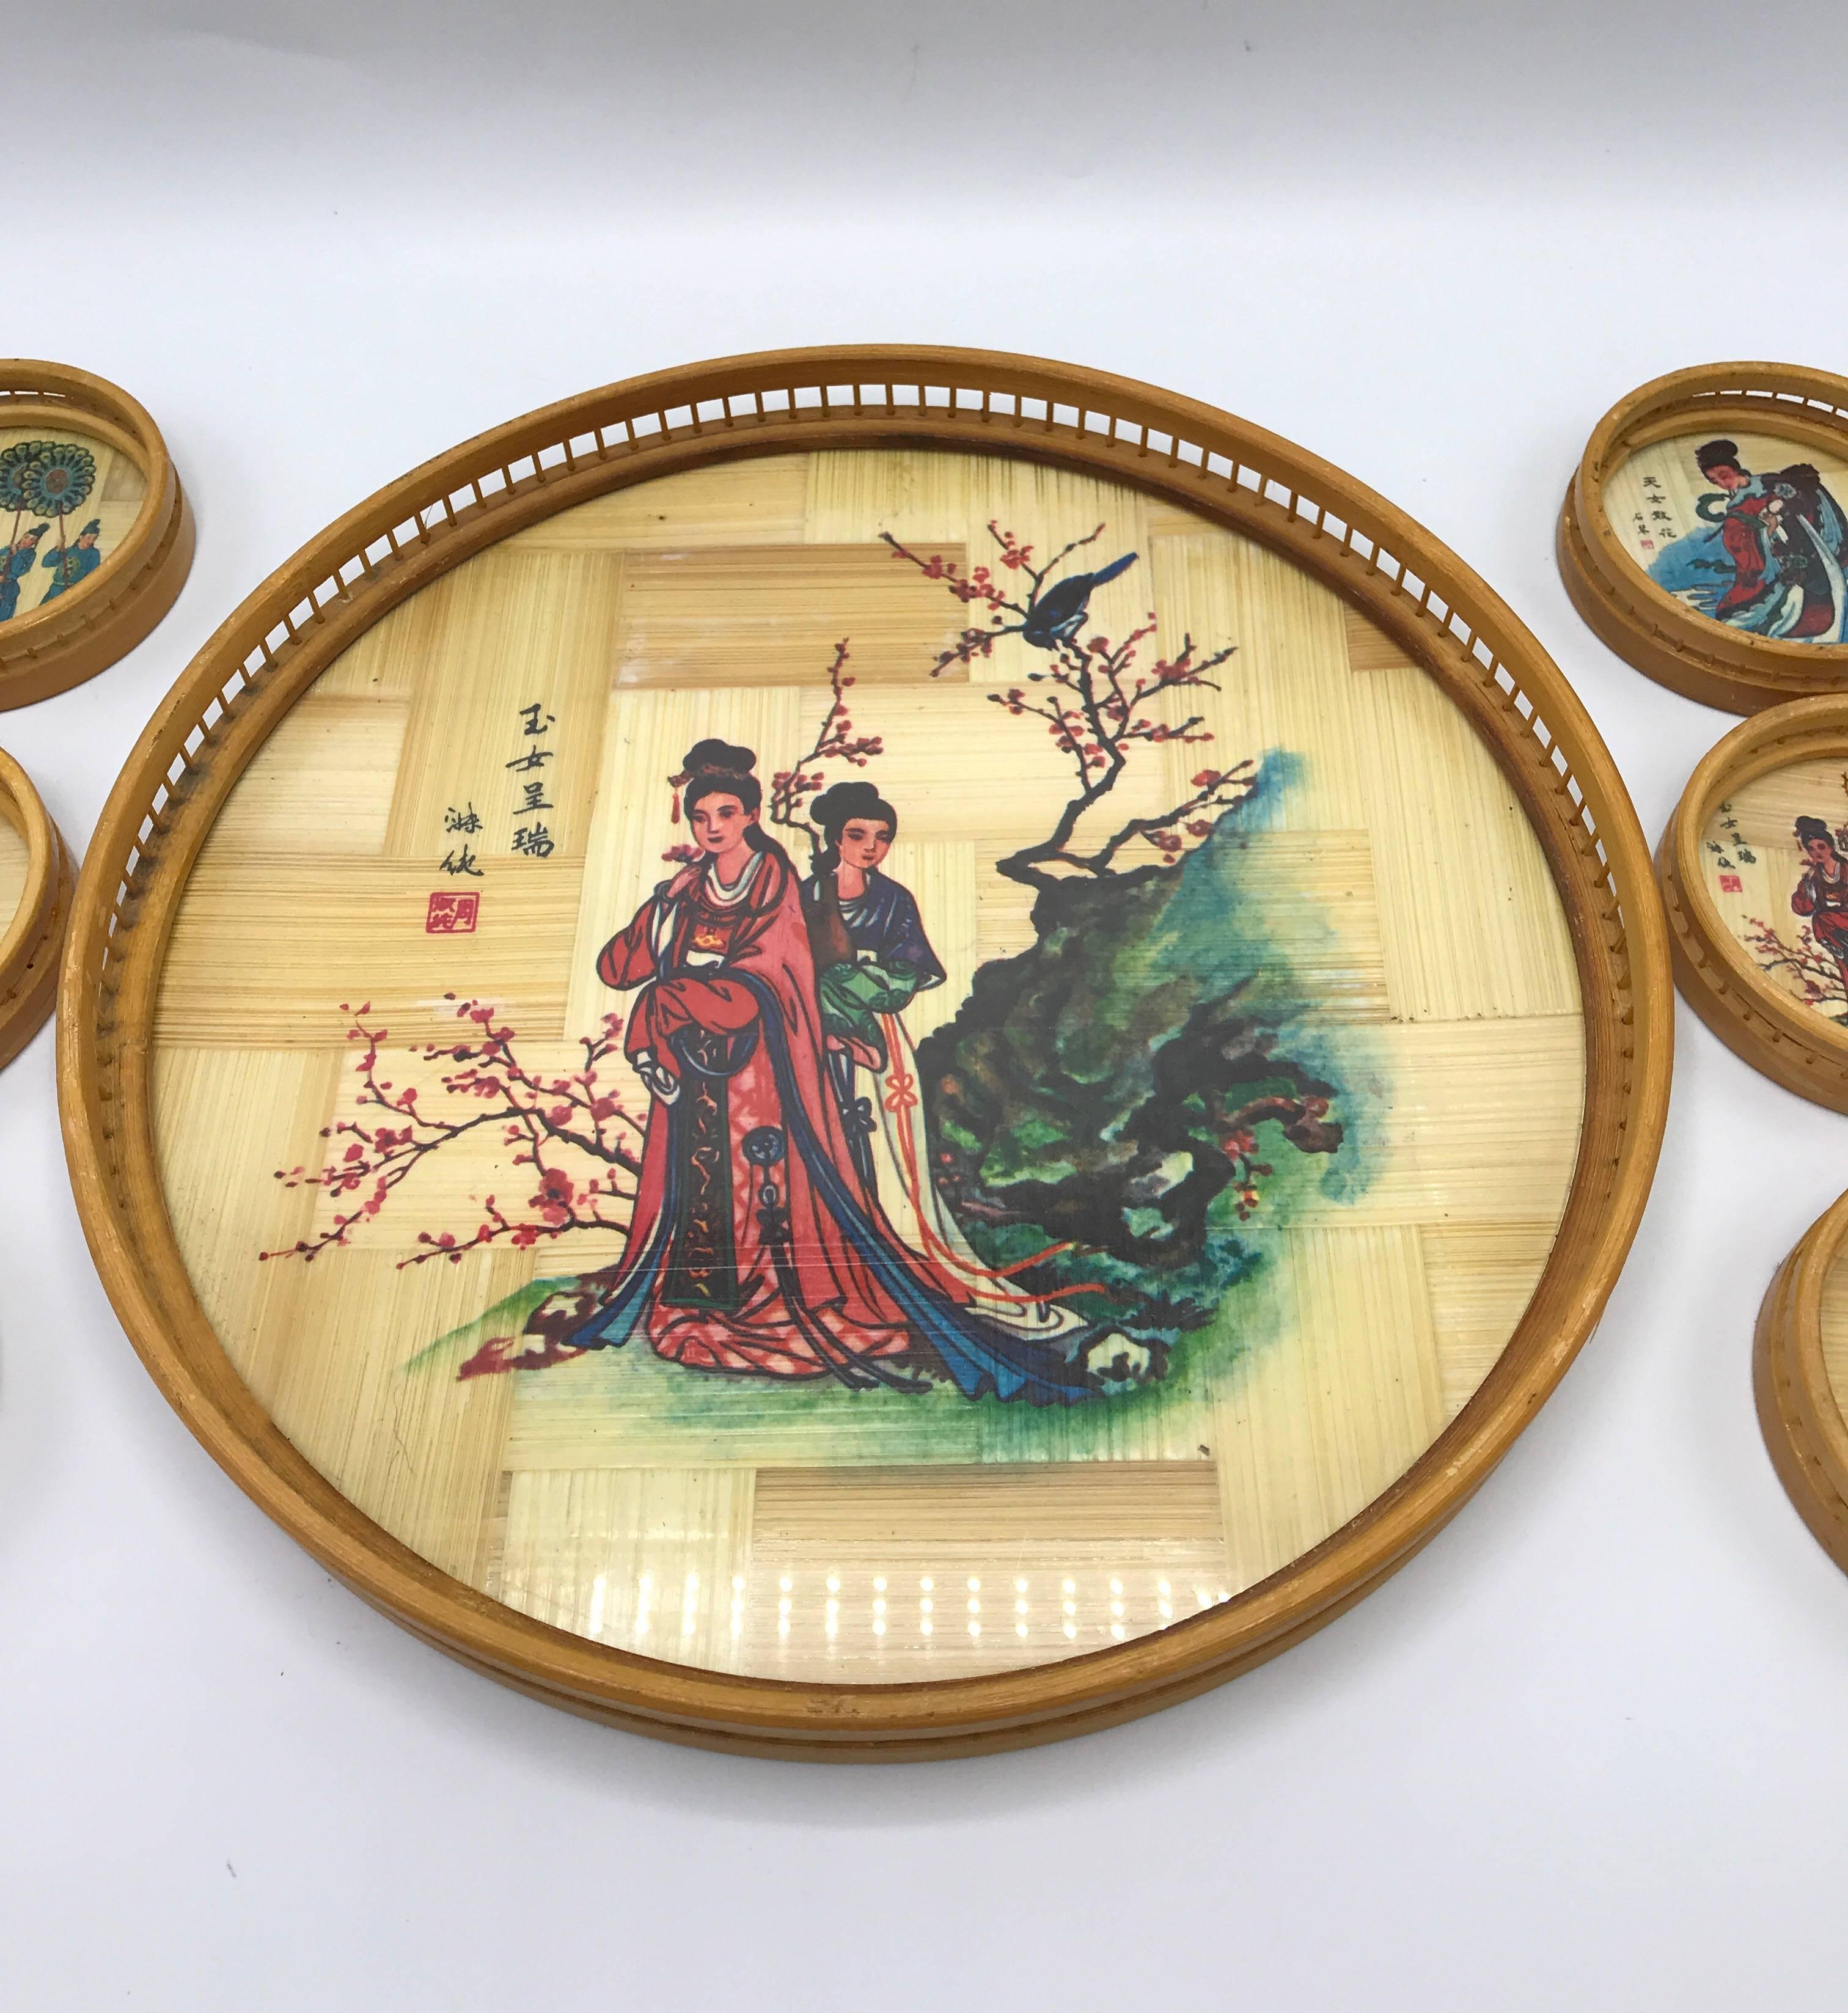 Offered is a beautiful, 1970s bamboo and glass coaster and tray set with an Asian Geisha motif. Set includes, six coasters and one tray. 

Measures: Coaster: 0.75” x 3.5”
Tray: 1.25” x 11.25”.